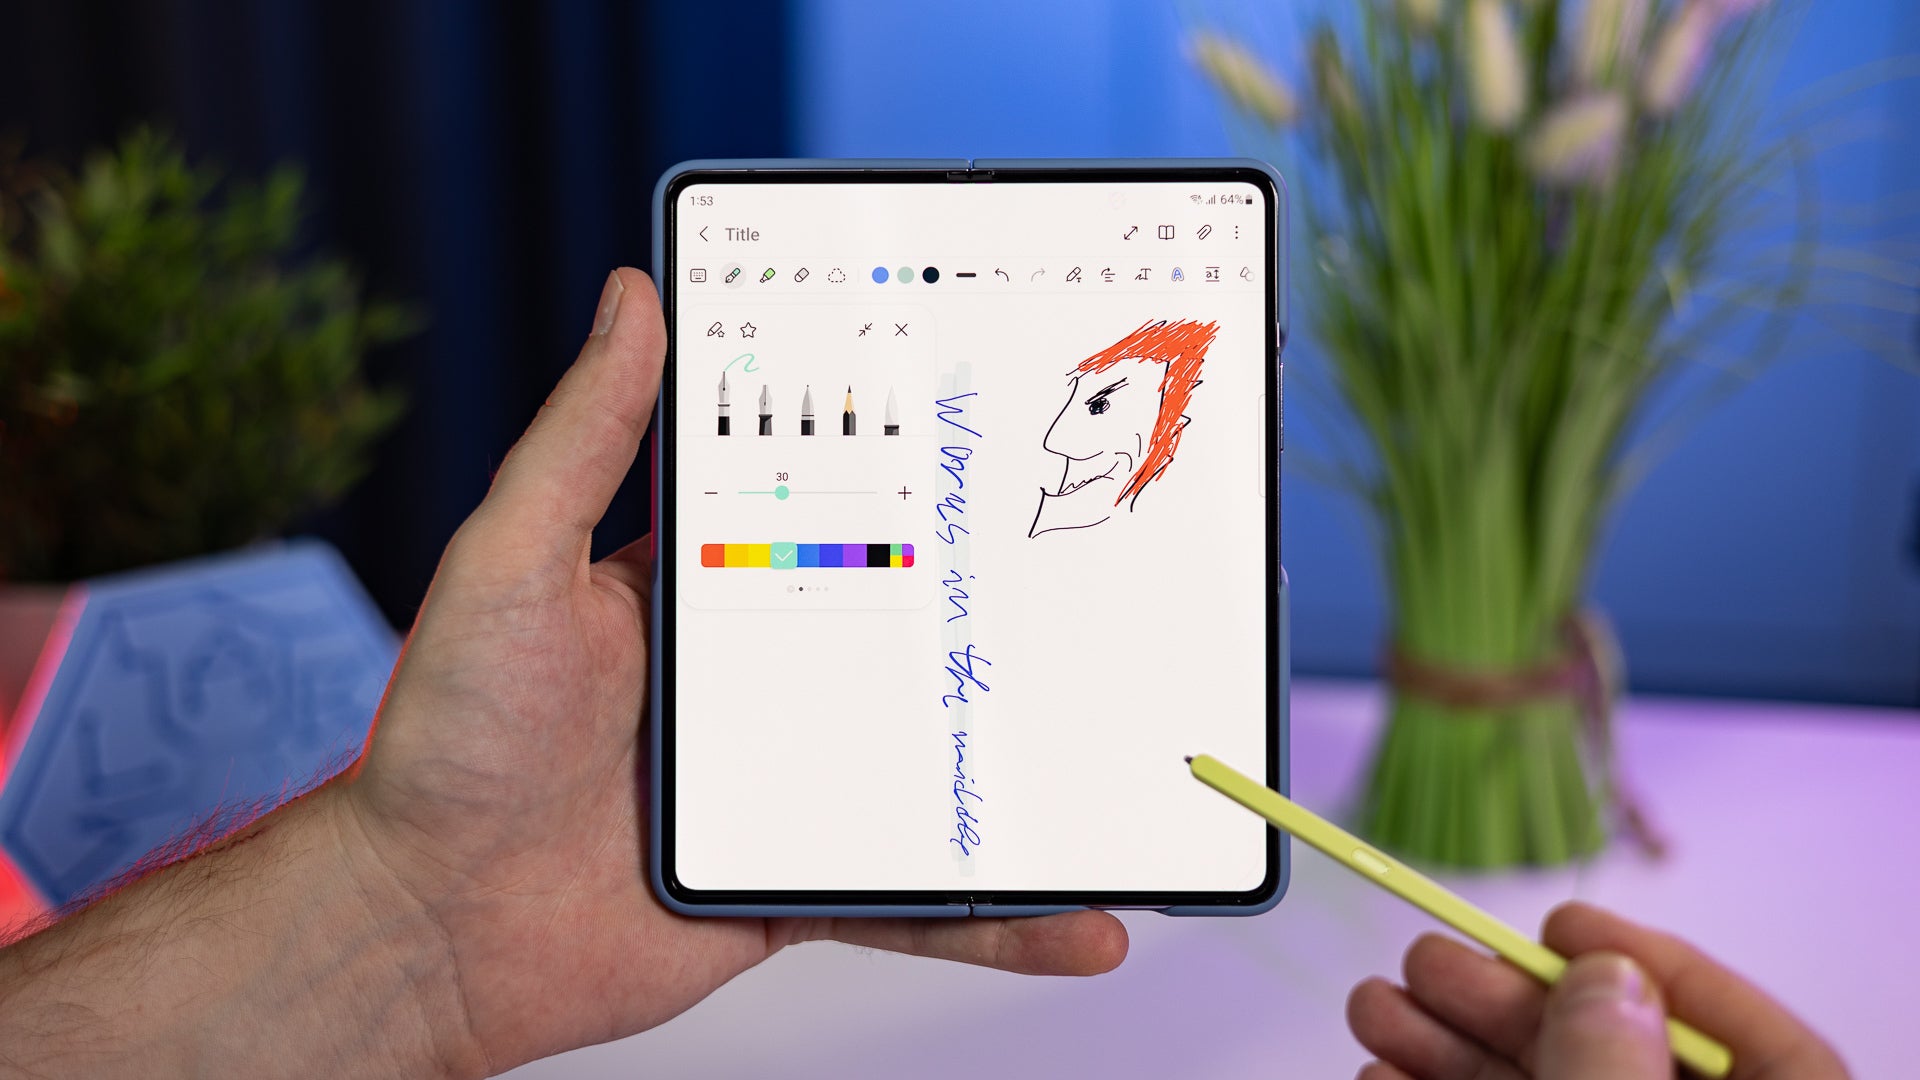 The Galaxy Fold 5 with its S Pen - What could a “Galaxy Fold 6 Ultra” bring that the classic Fold 6 probably won't have?